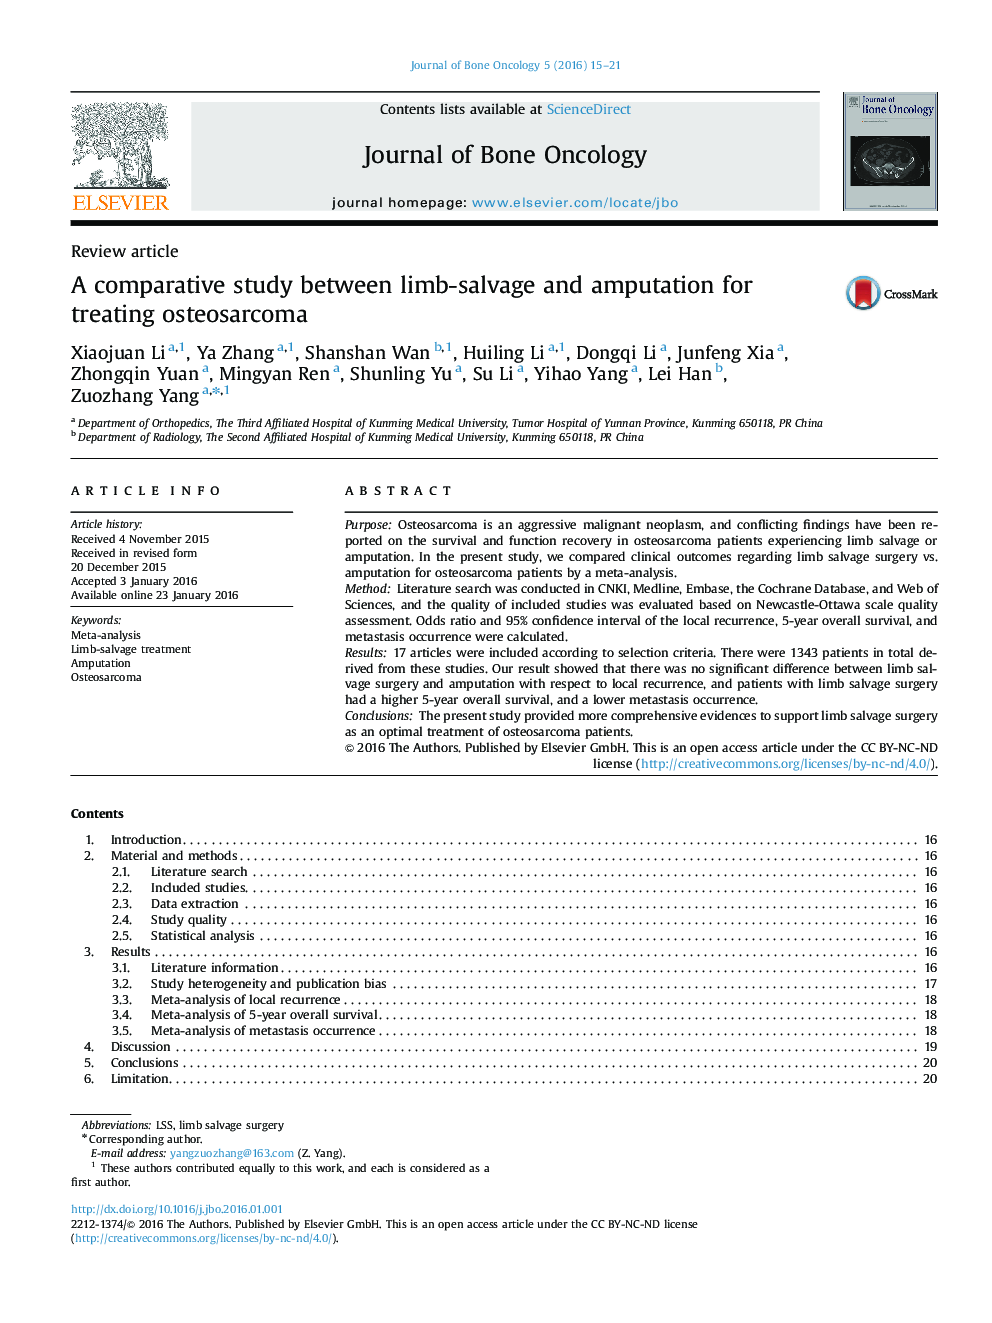 A comparative study between limb-salvage and amputation for treating osteosarcoma